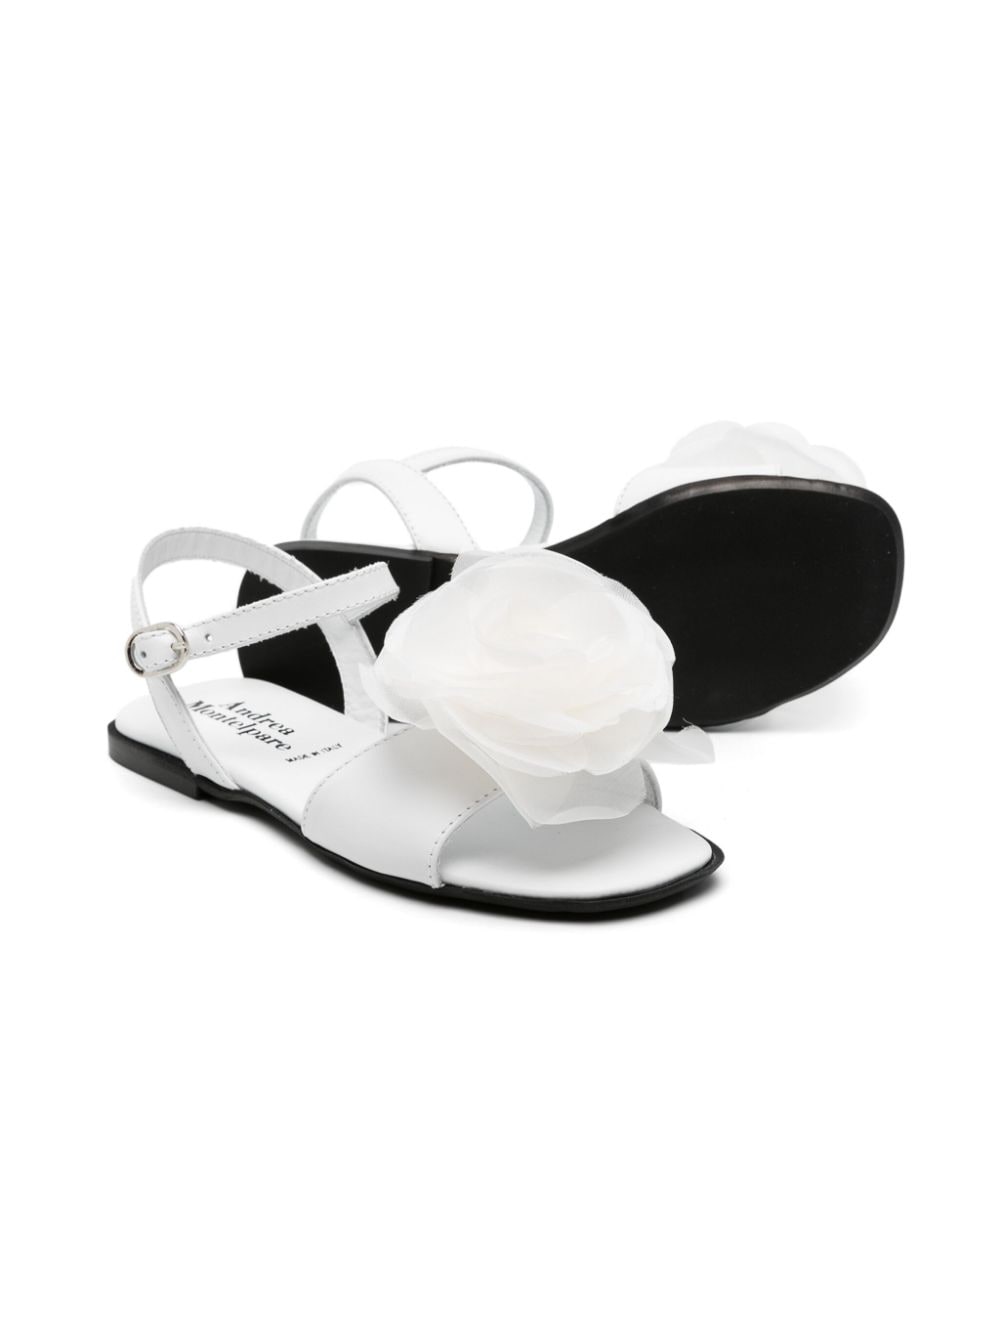 Sandales blanches fille